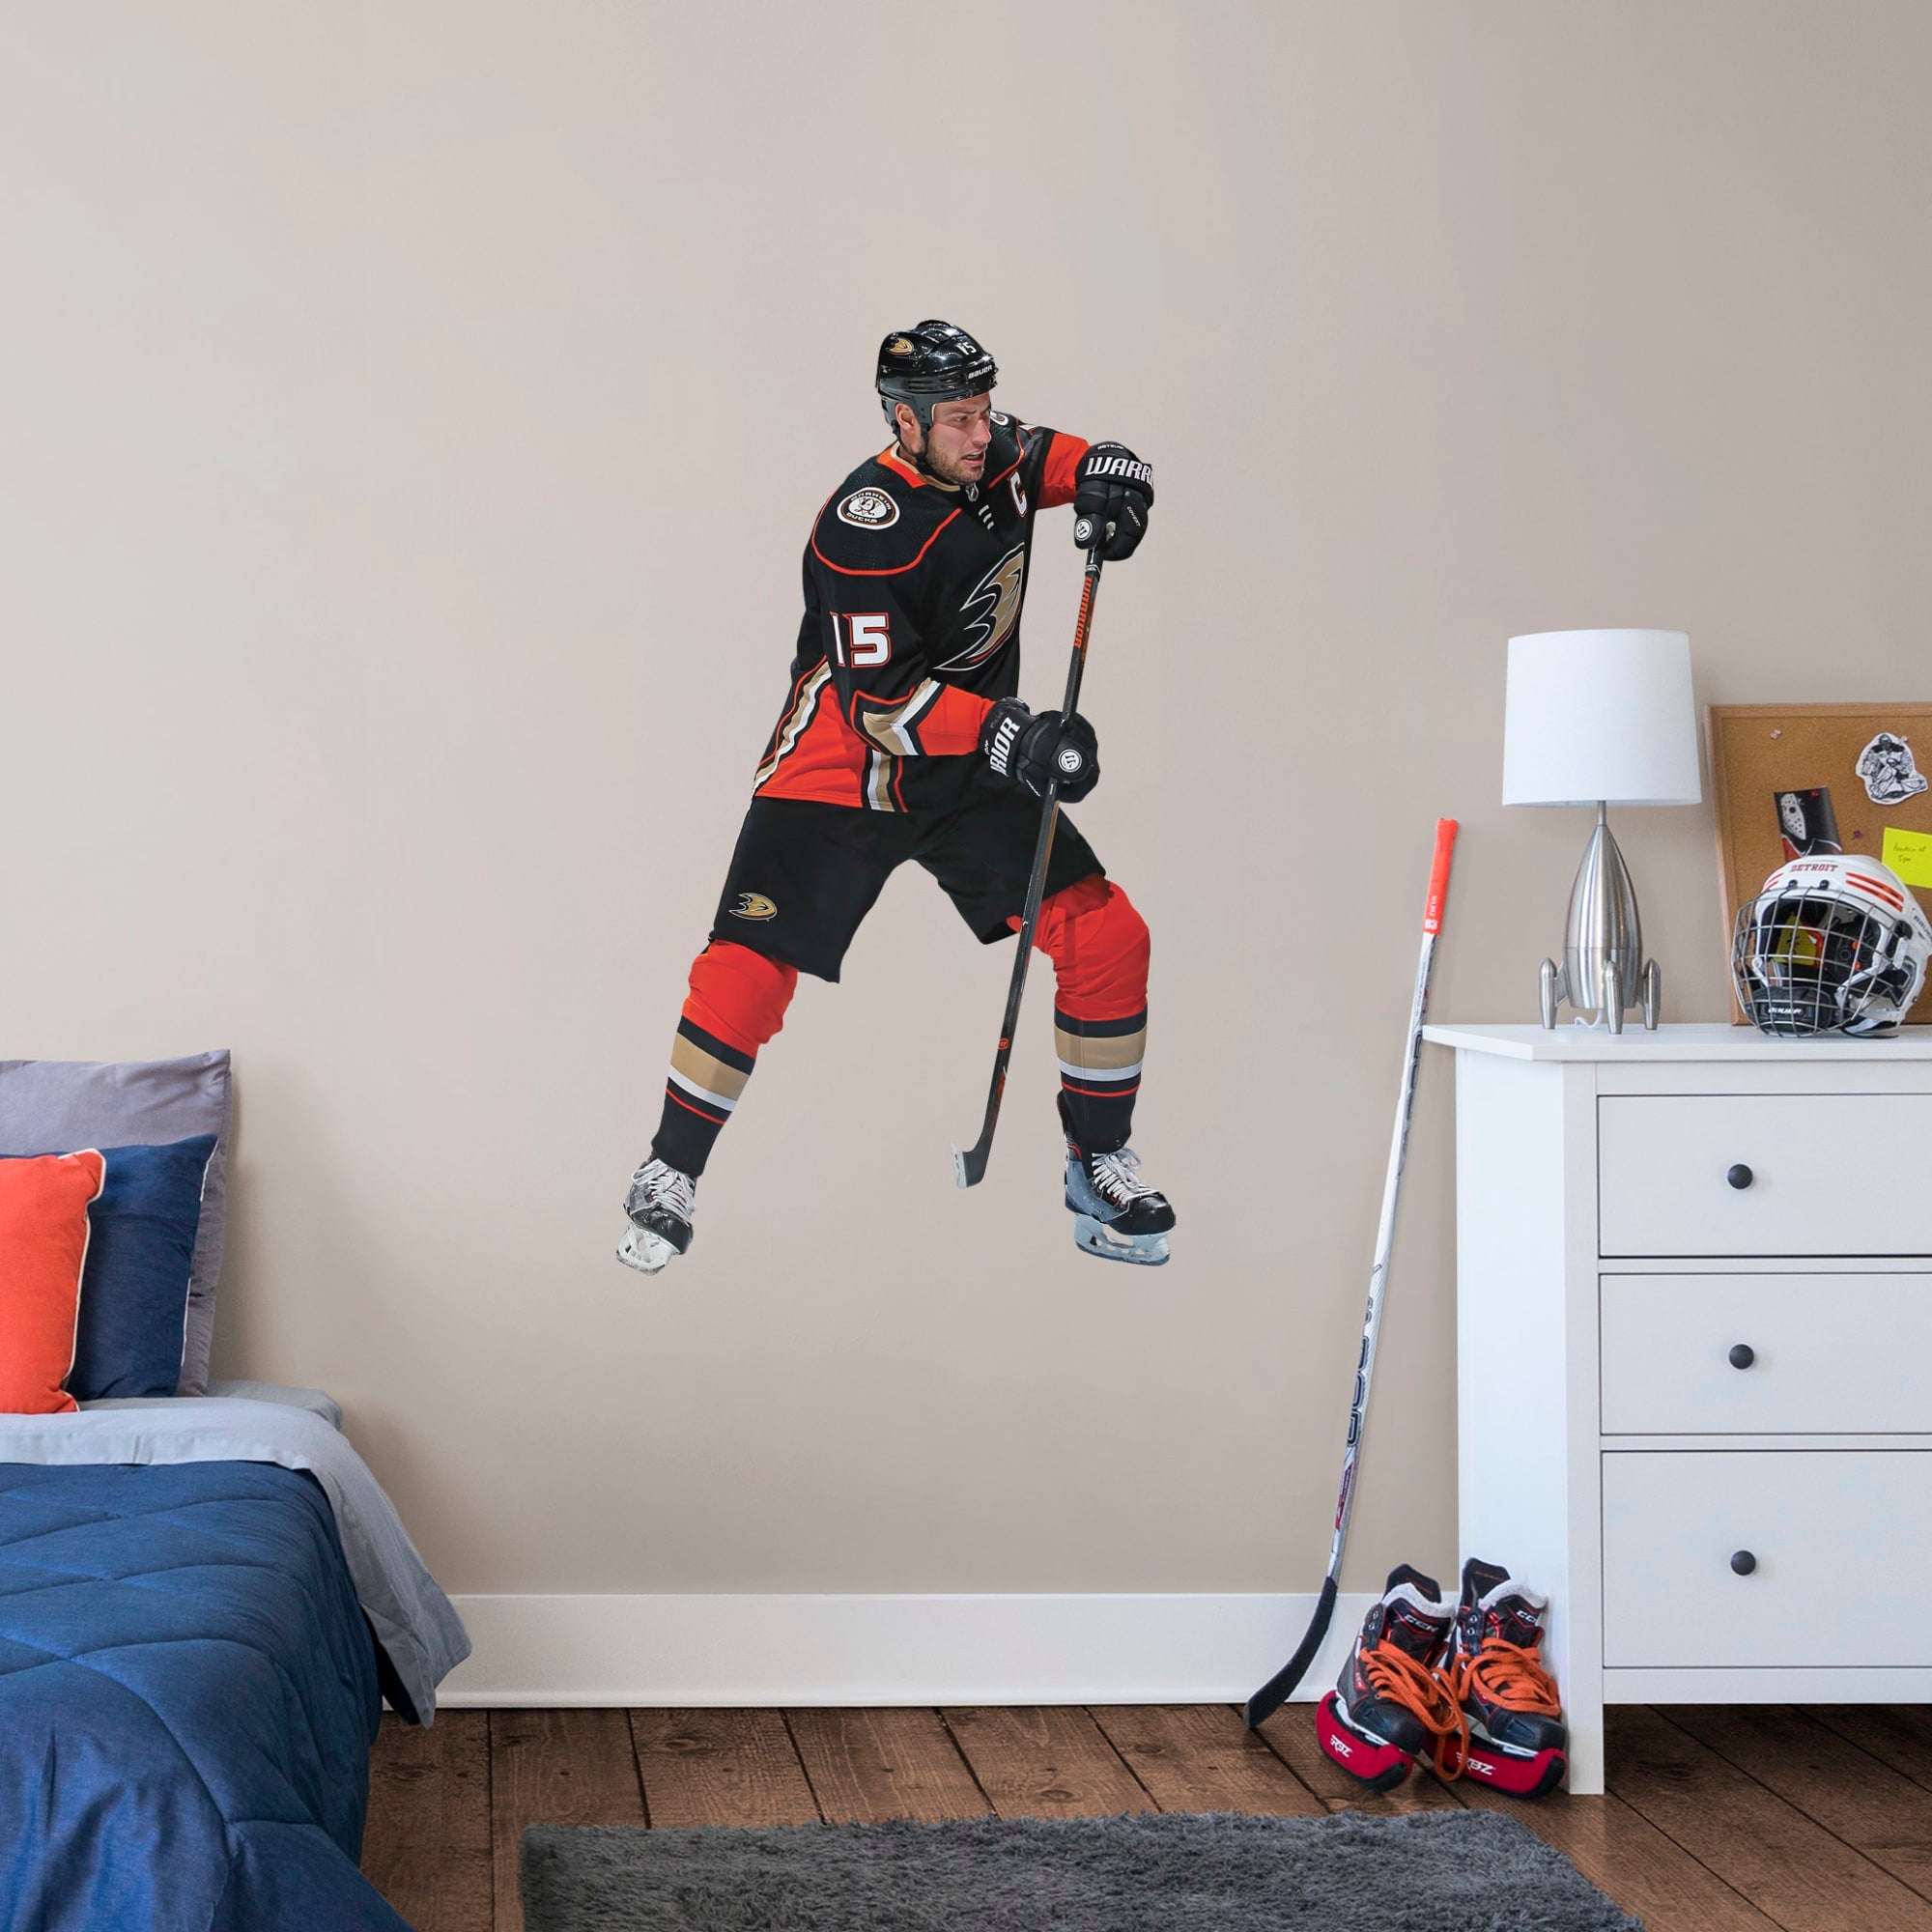 Ryan Getzlaf for Anaheim Ducks - Officially Licensed NHL Removable Wall Decal Giant Athlete + 2 Decals (31"W x 51"H) by Fathead